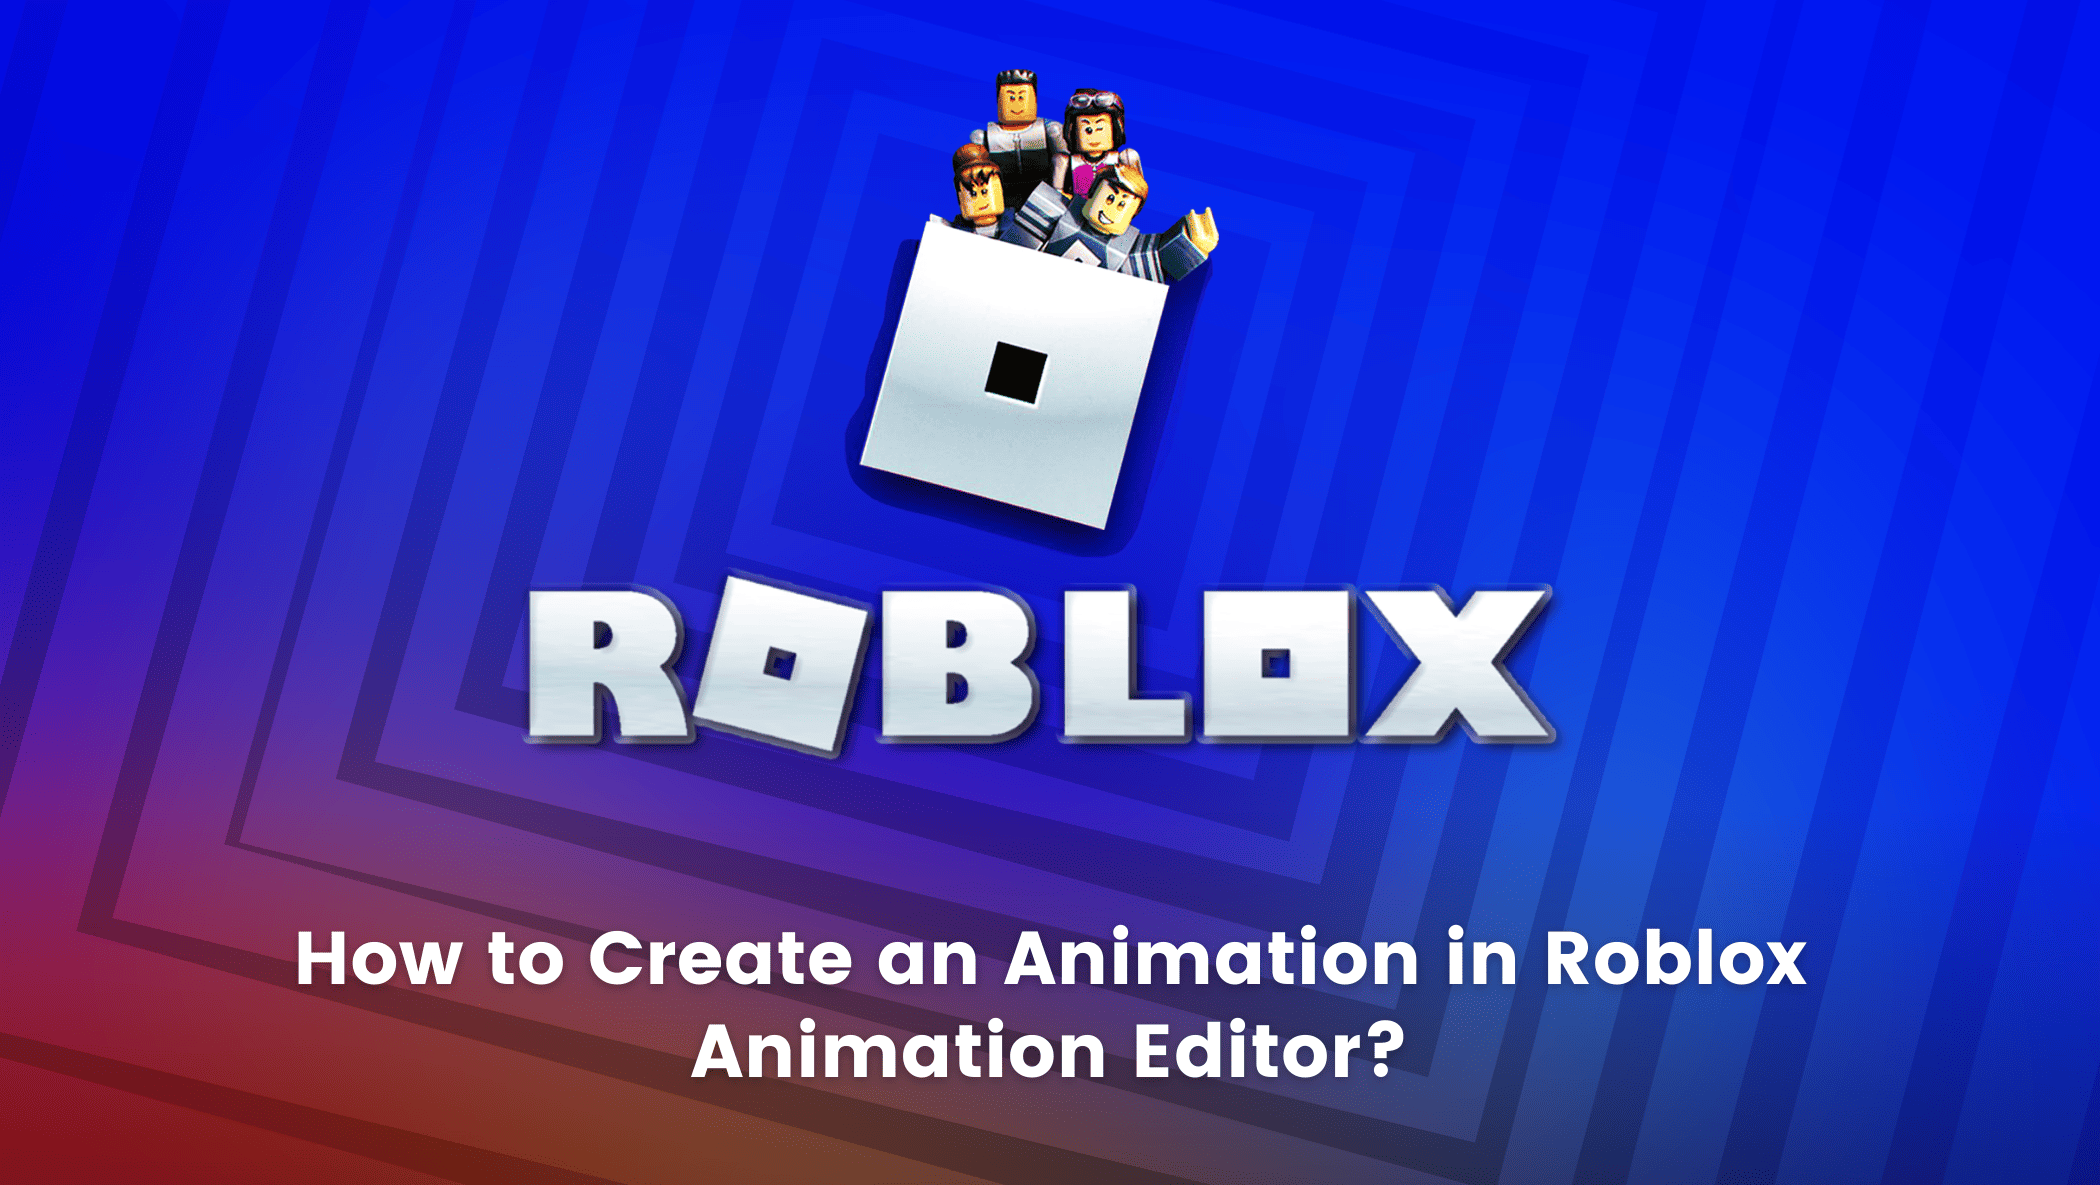 How to Create an Animation in Roblox Animation Editor